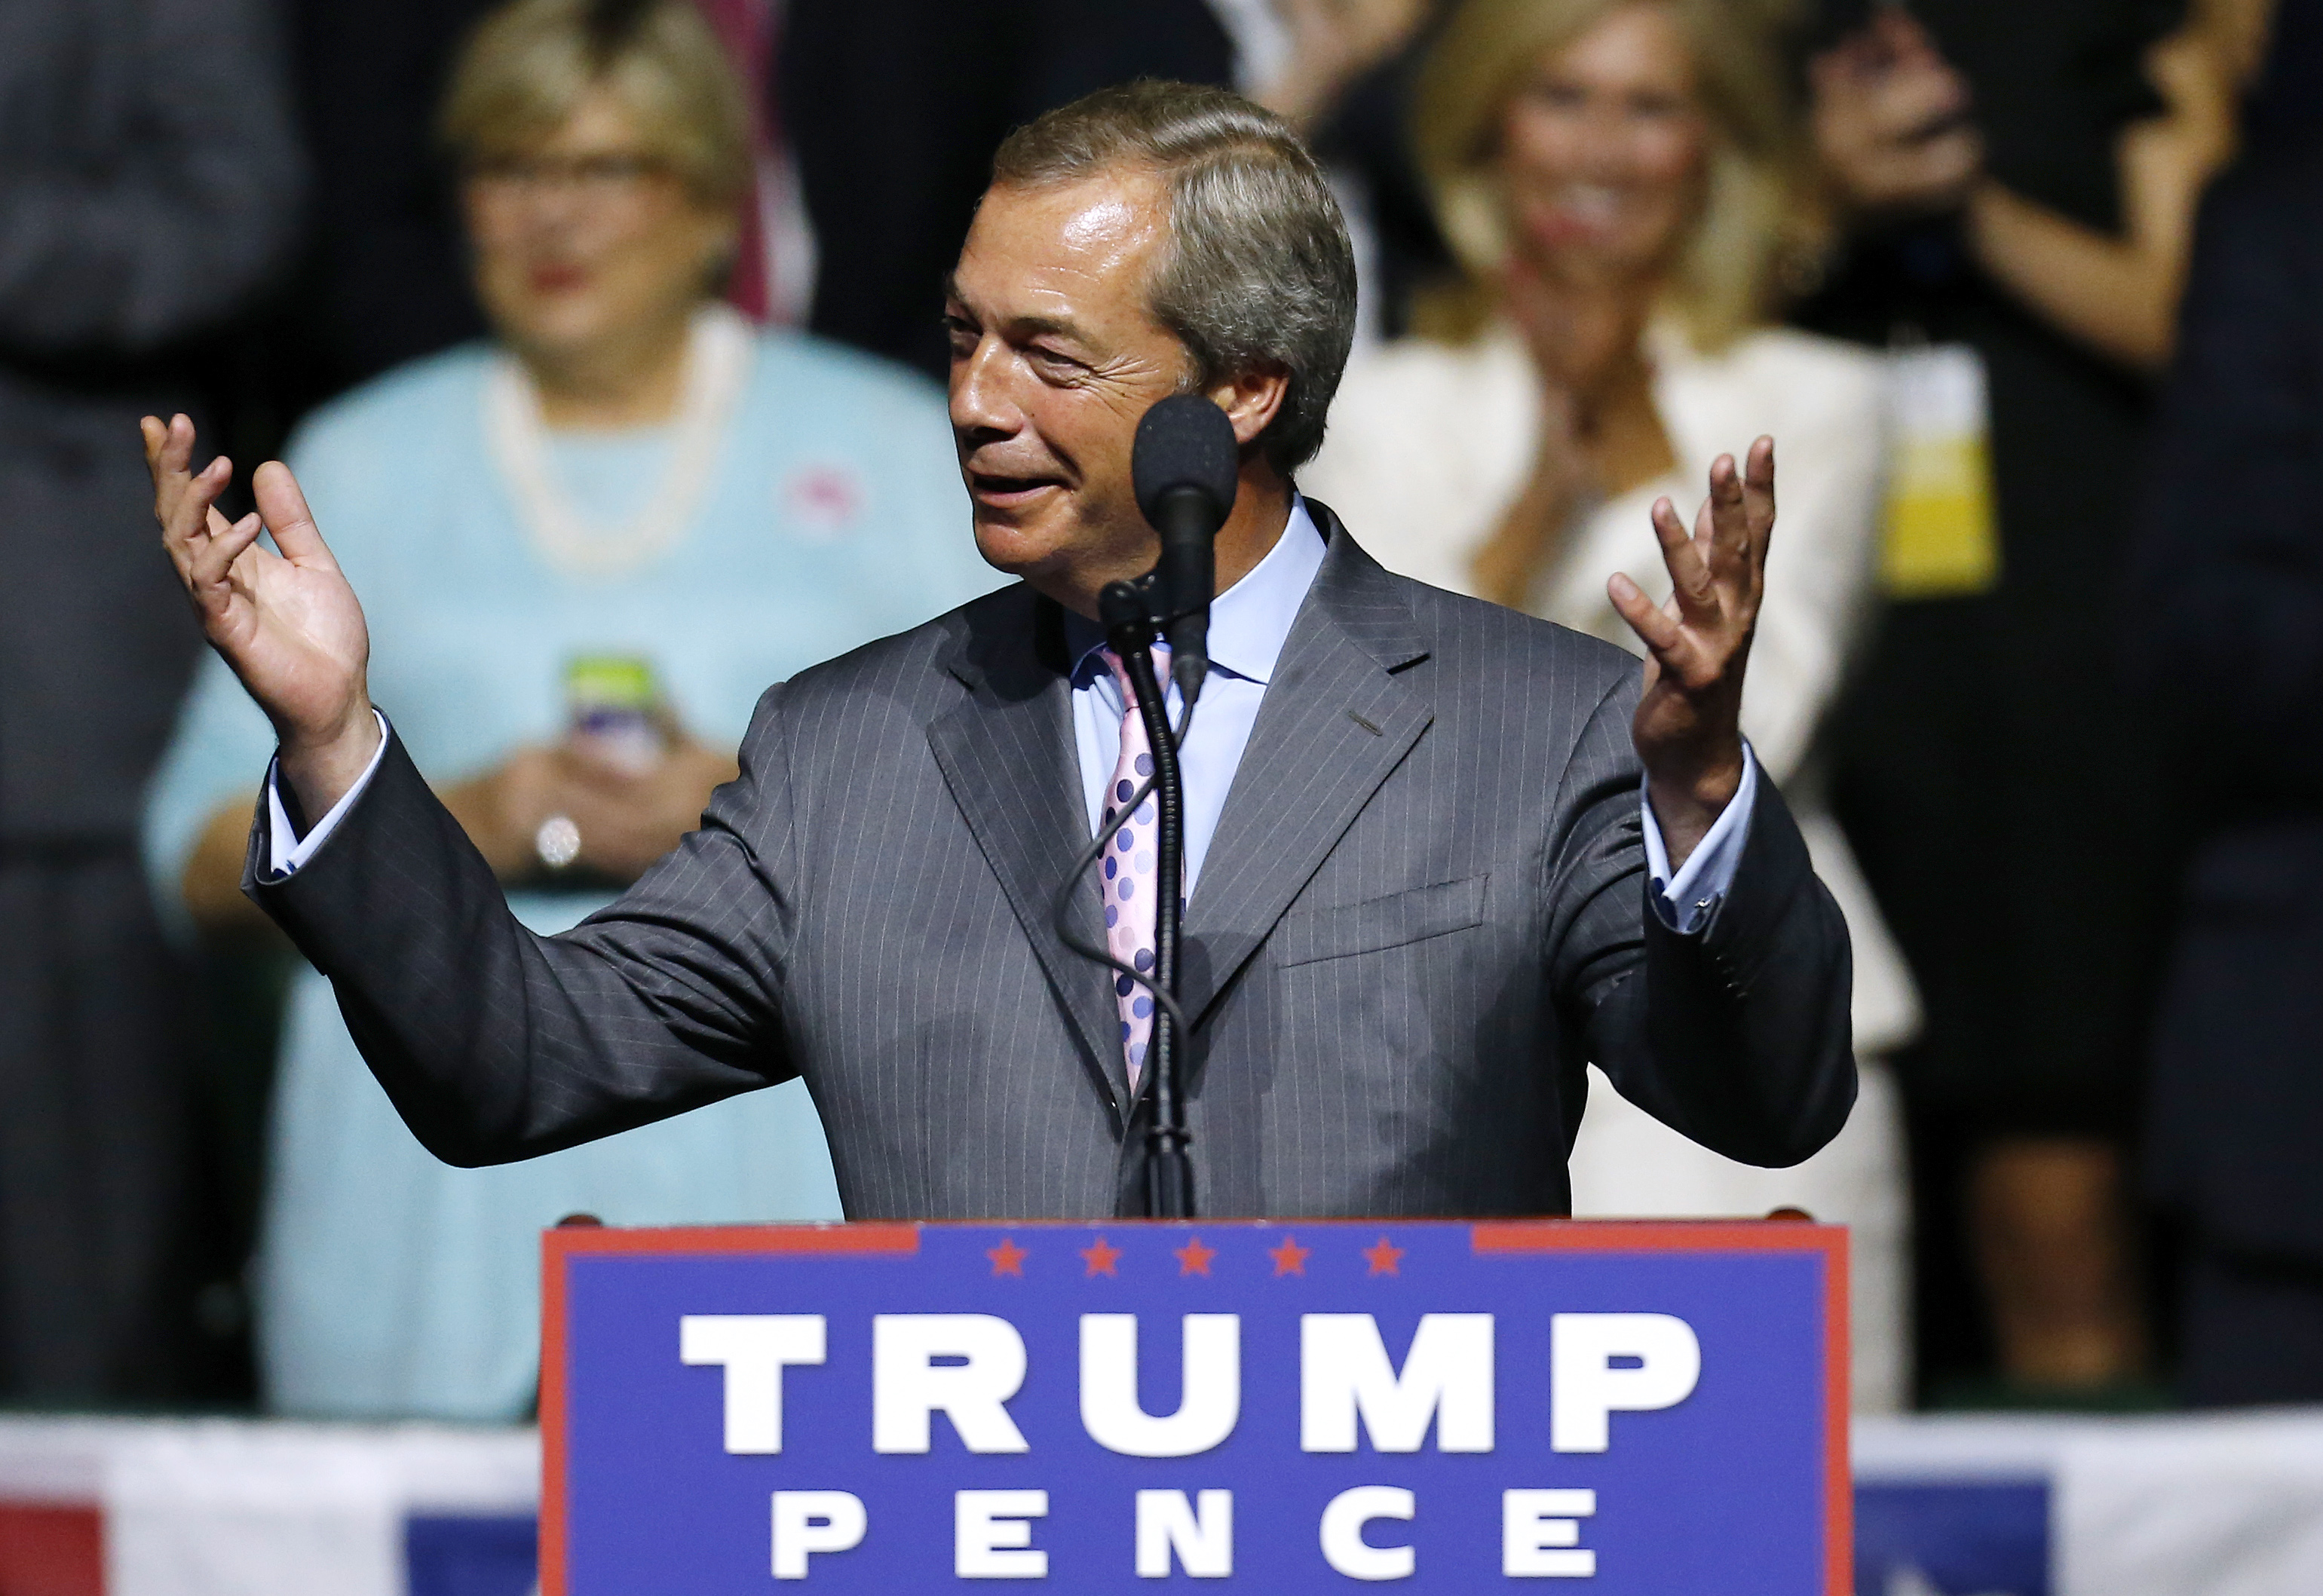 U.K. Independence Party leader Nigel Farage speaks during a campaign rally for Republican presidential nominee Donald Trump at the Mississippi Coliseum in Jackson, Miss., on Aug. 24, 2016 (Jonathan Bachman—Getty Images)